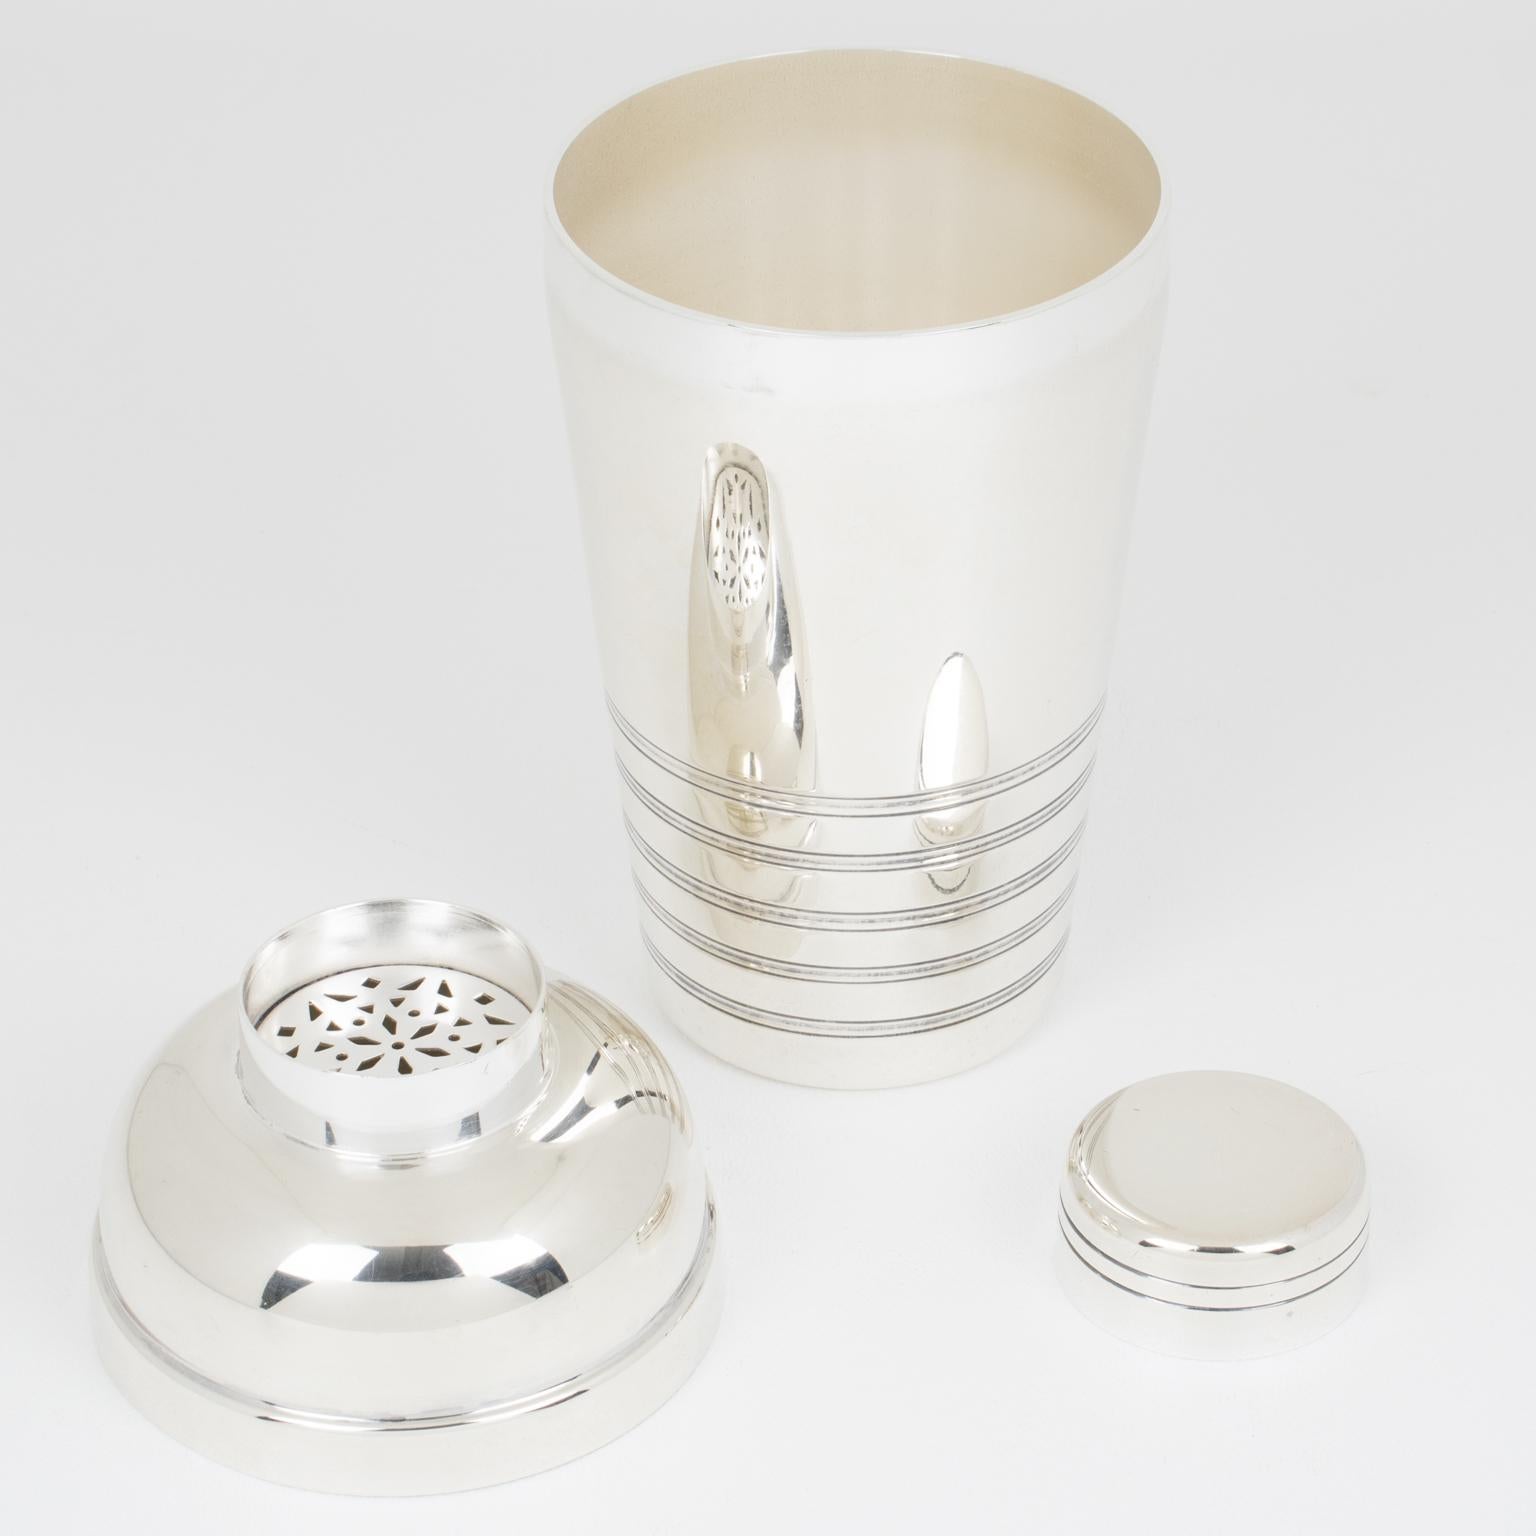 This elegant French Art Deco silver plate cylindrical cocktail or Martini shaker was designed by silversmith Maison Vessiere, Paris. The three-sectioned cocktail shaker has a removable cap and strainer. The piece features a lovely geometric shape